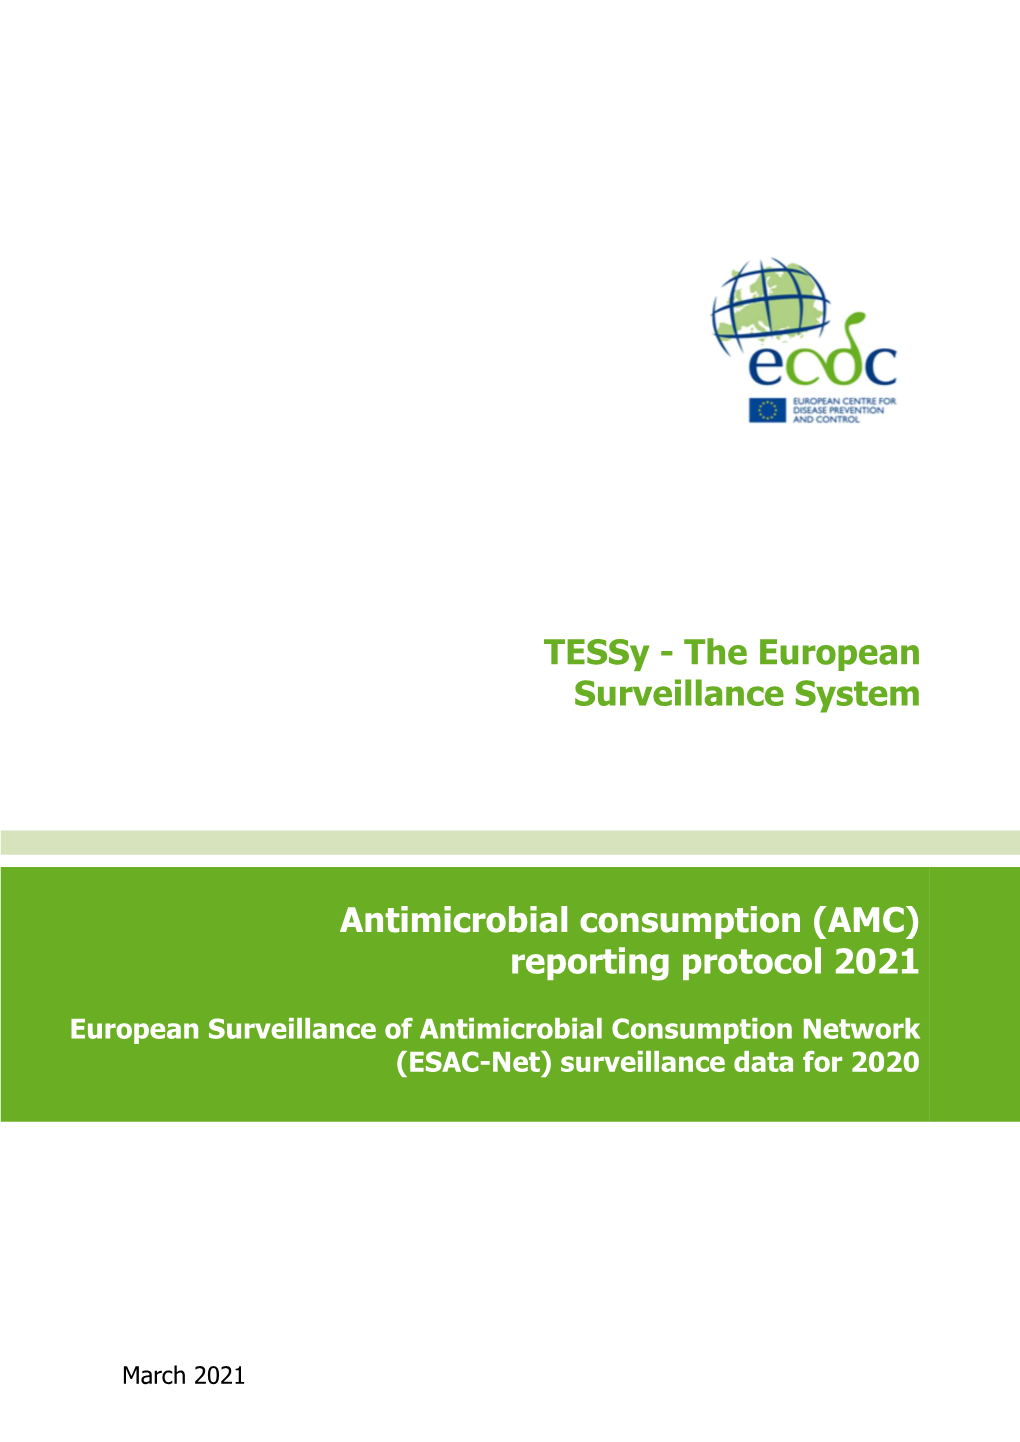 Antimicrobial Consumption (AMC) Reporting Protocol 2021